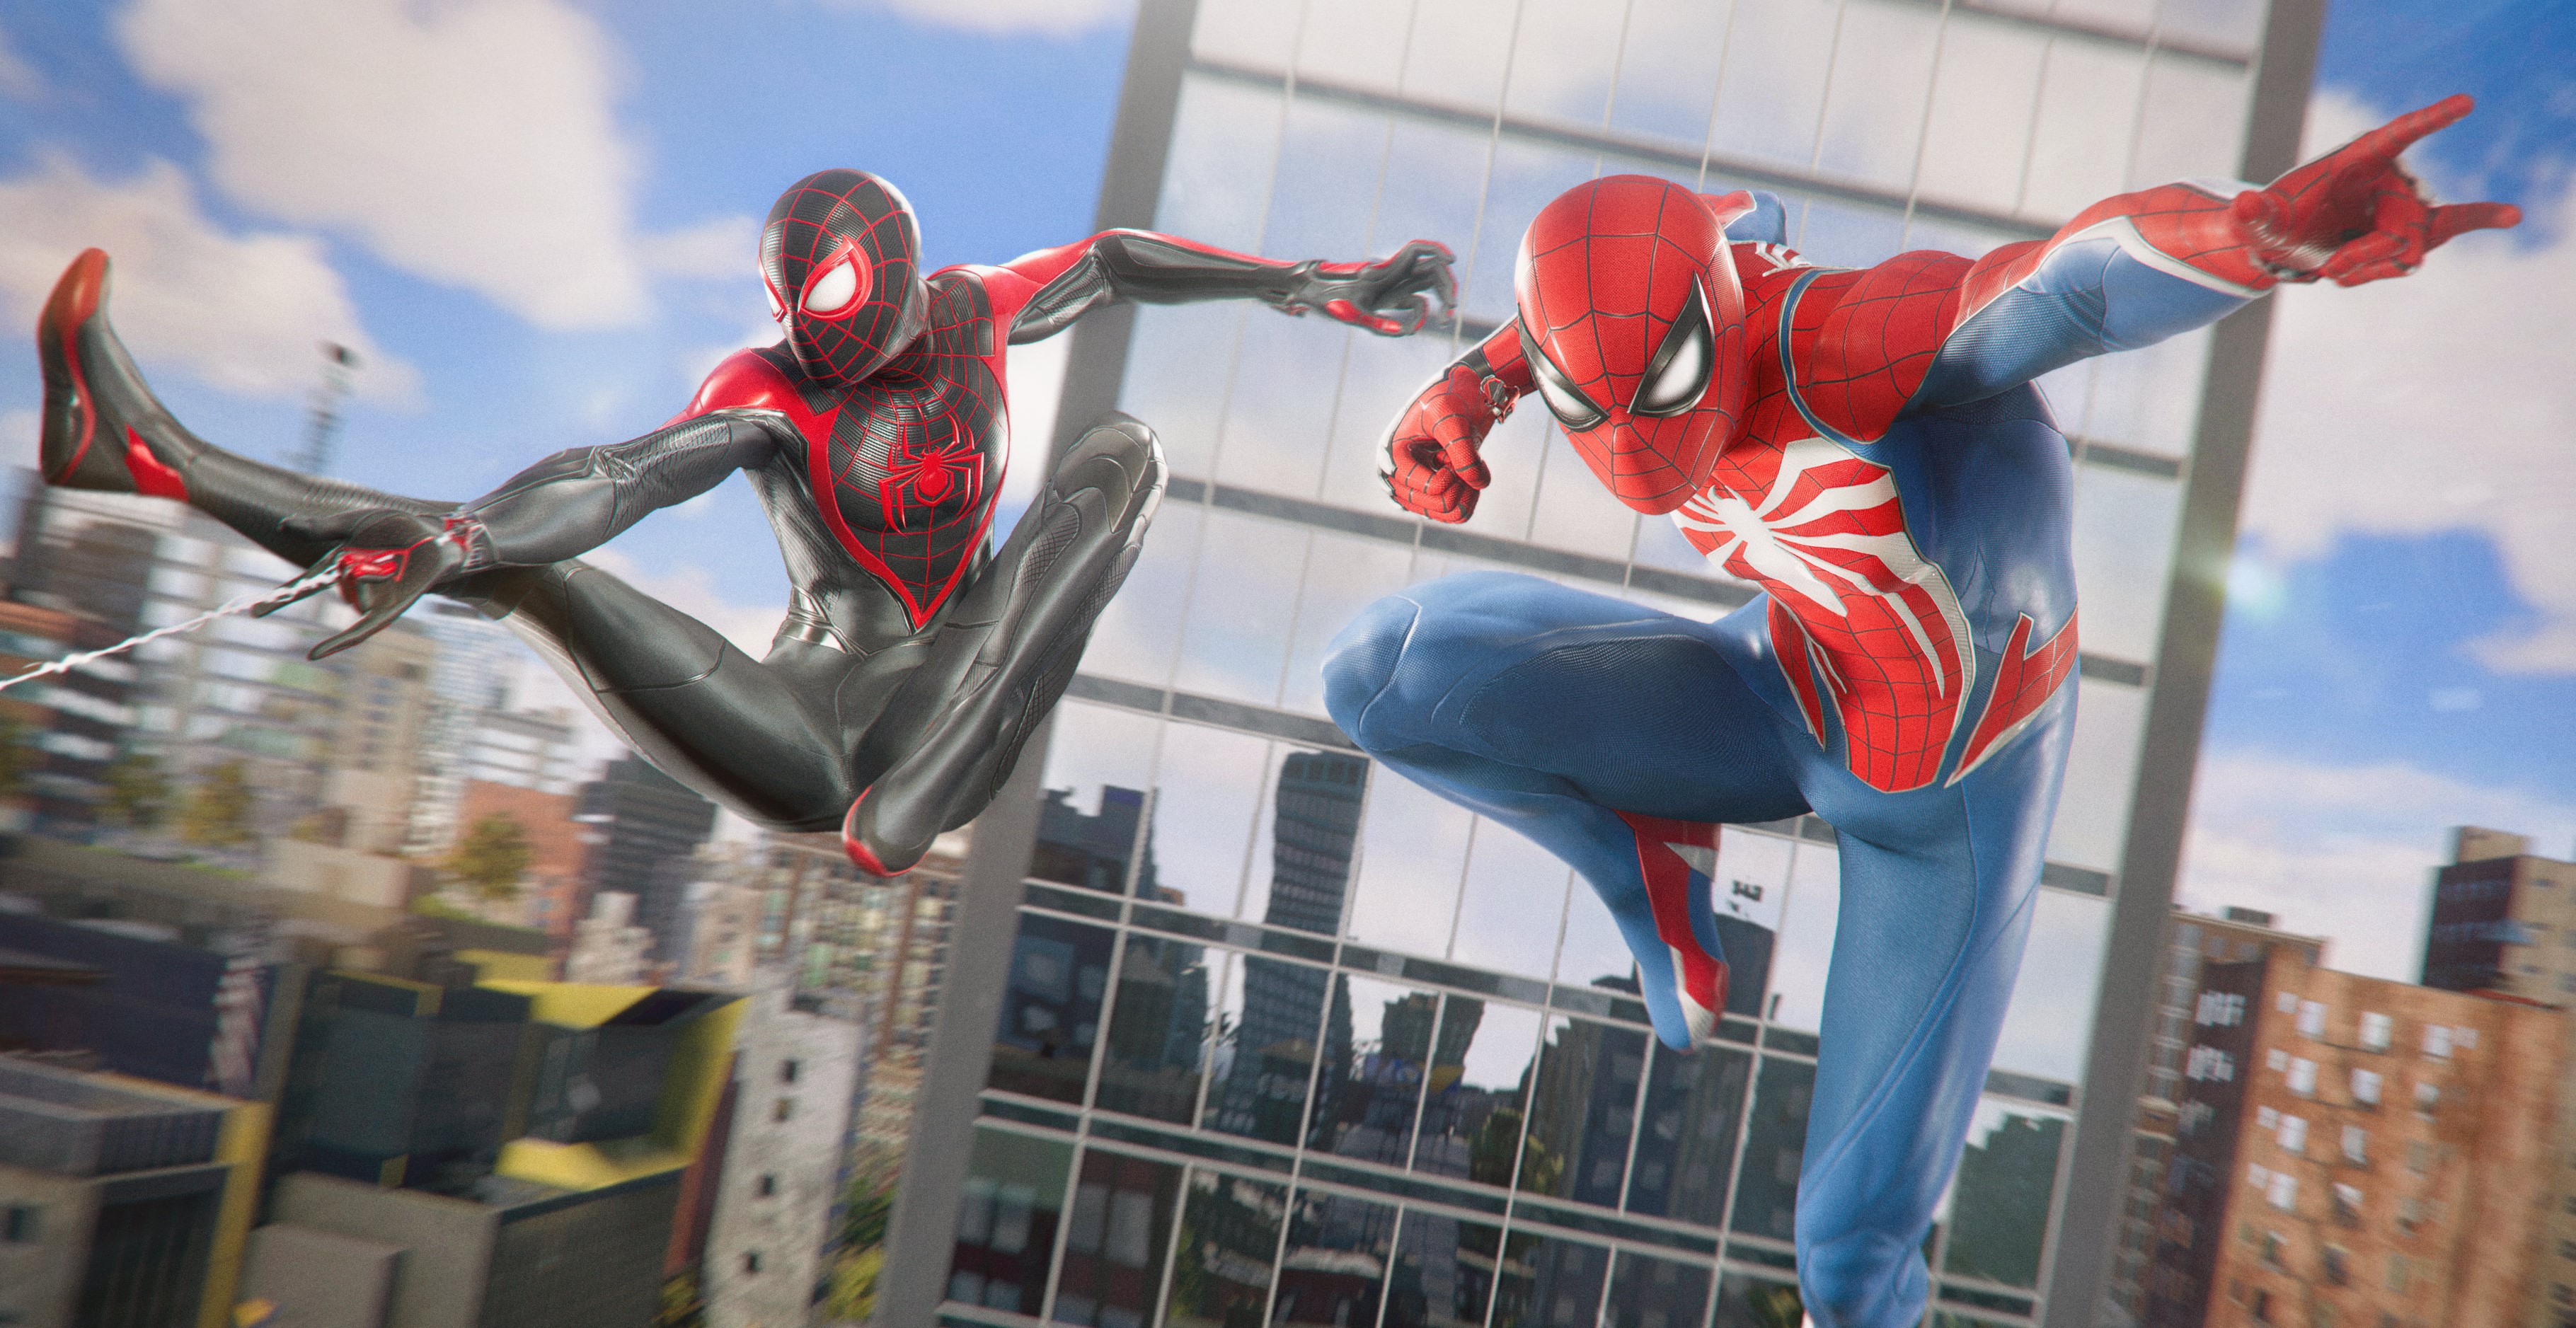 Marvel's Spider-Man 2 review: from amazing to ultimate